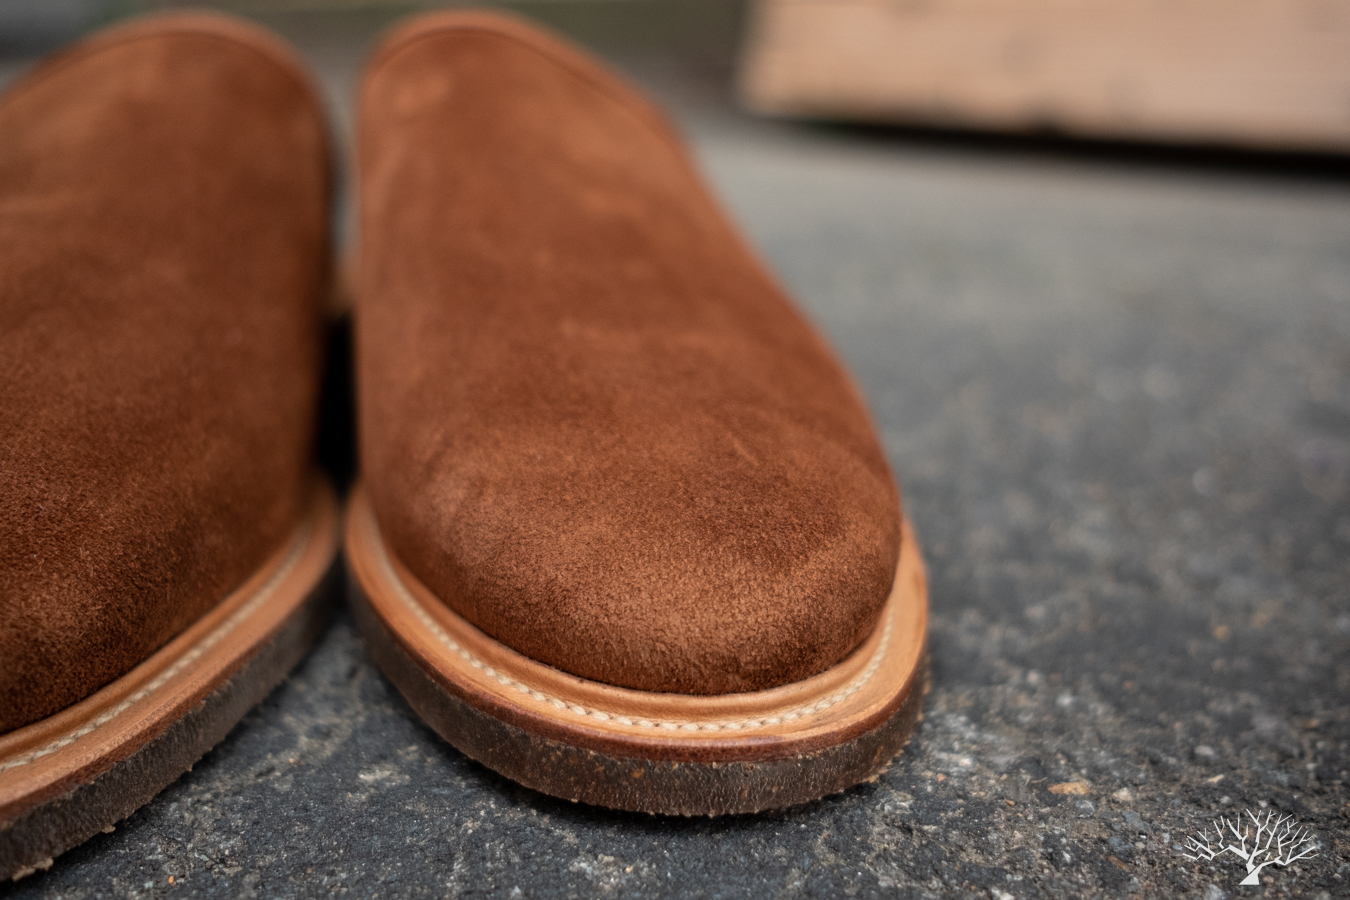 Viberg for Withered Fig Mule Chestnut Calf Suede